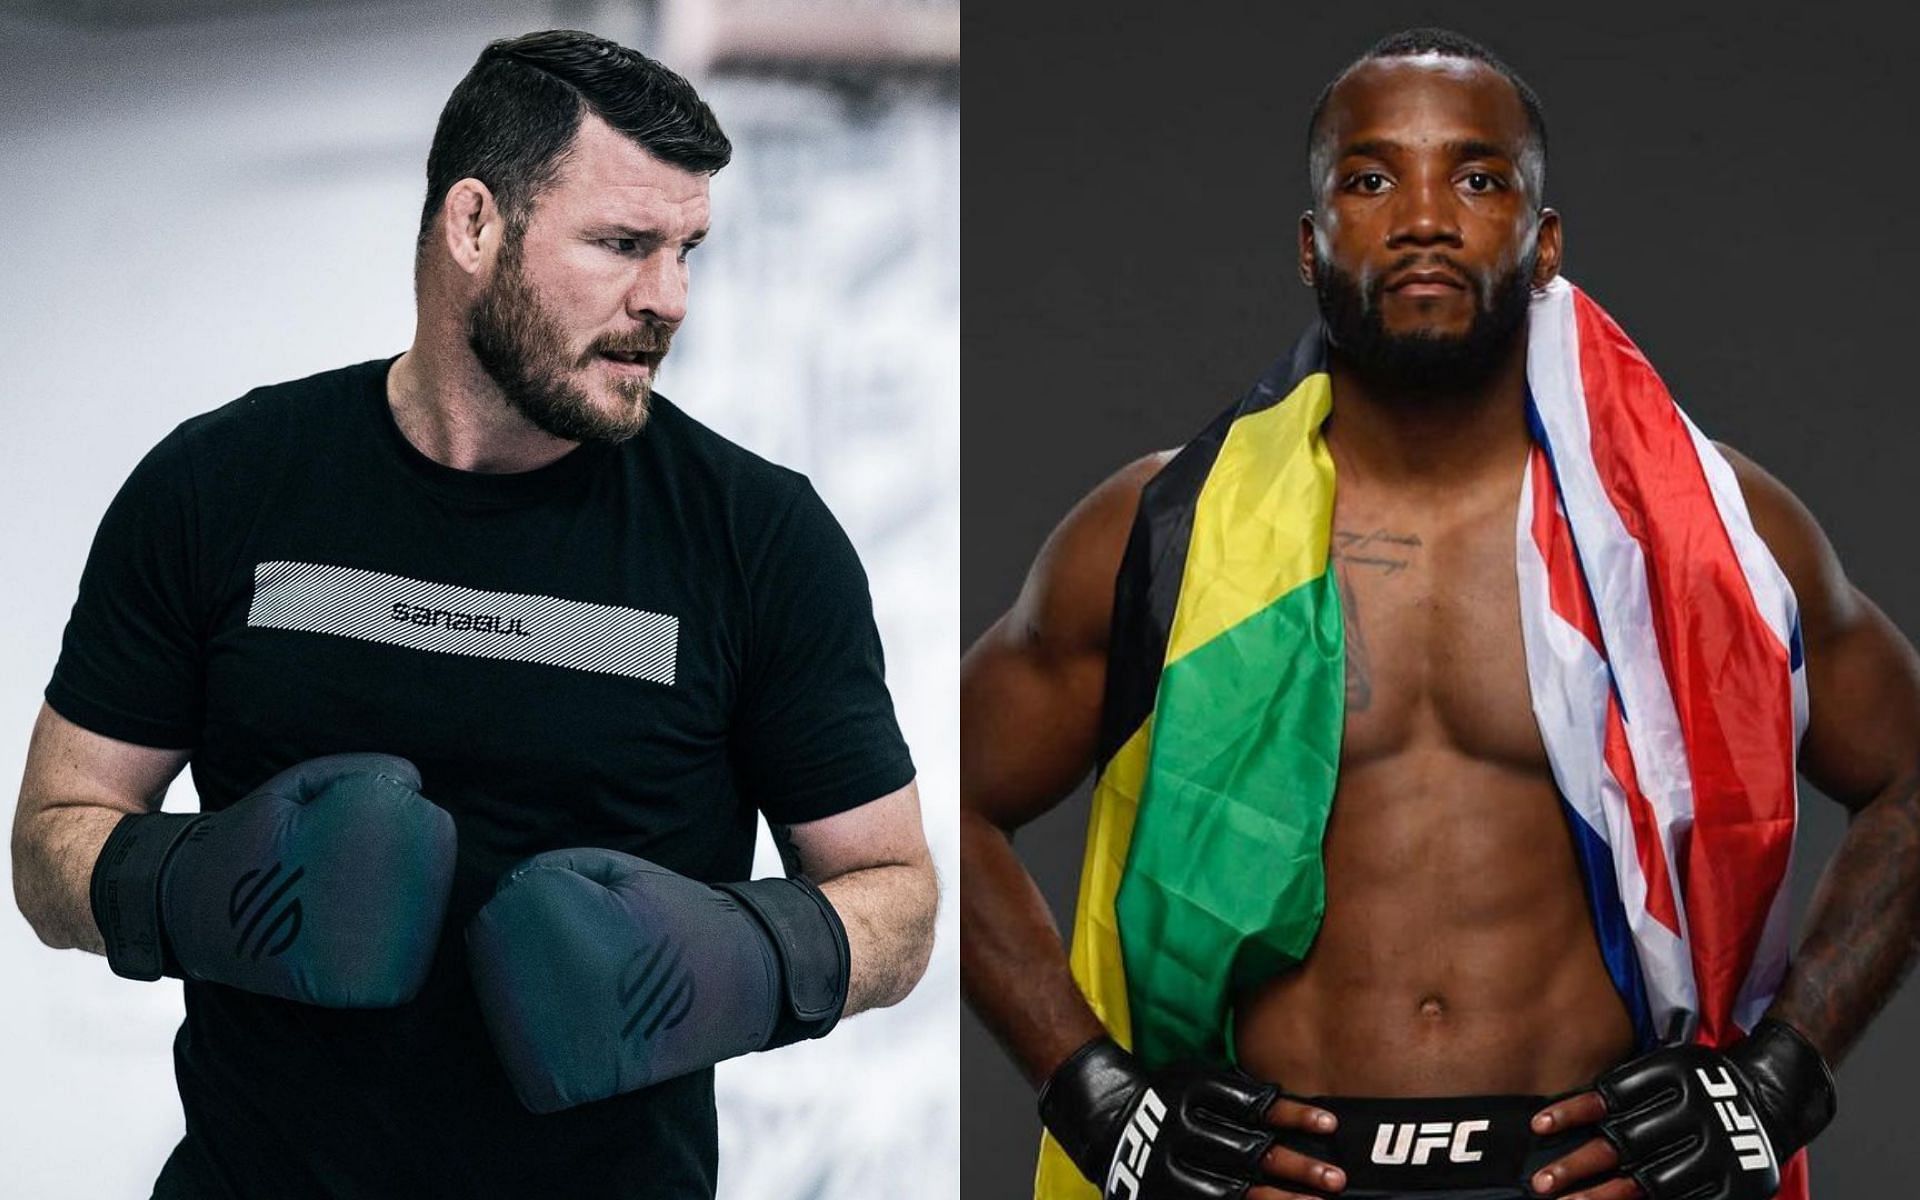 Michael Bisping (L) and Leon Edwards (R) via Instagram @mikebisping and @leonedwardsmma